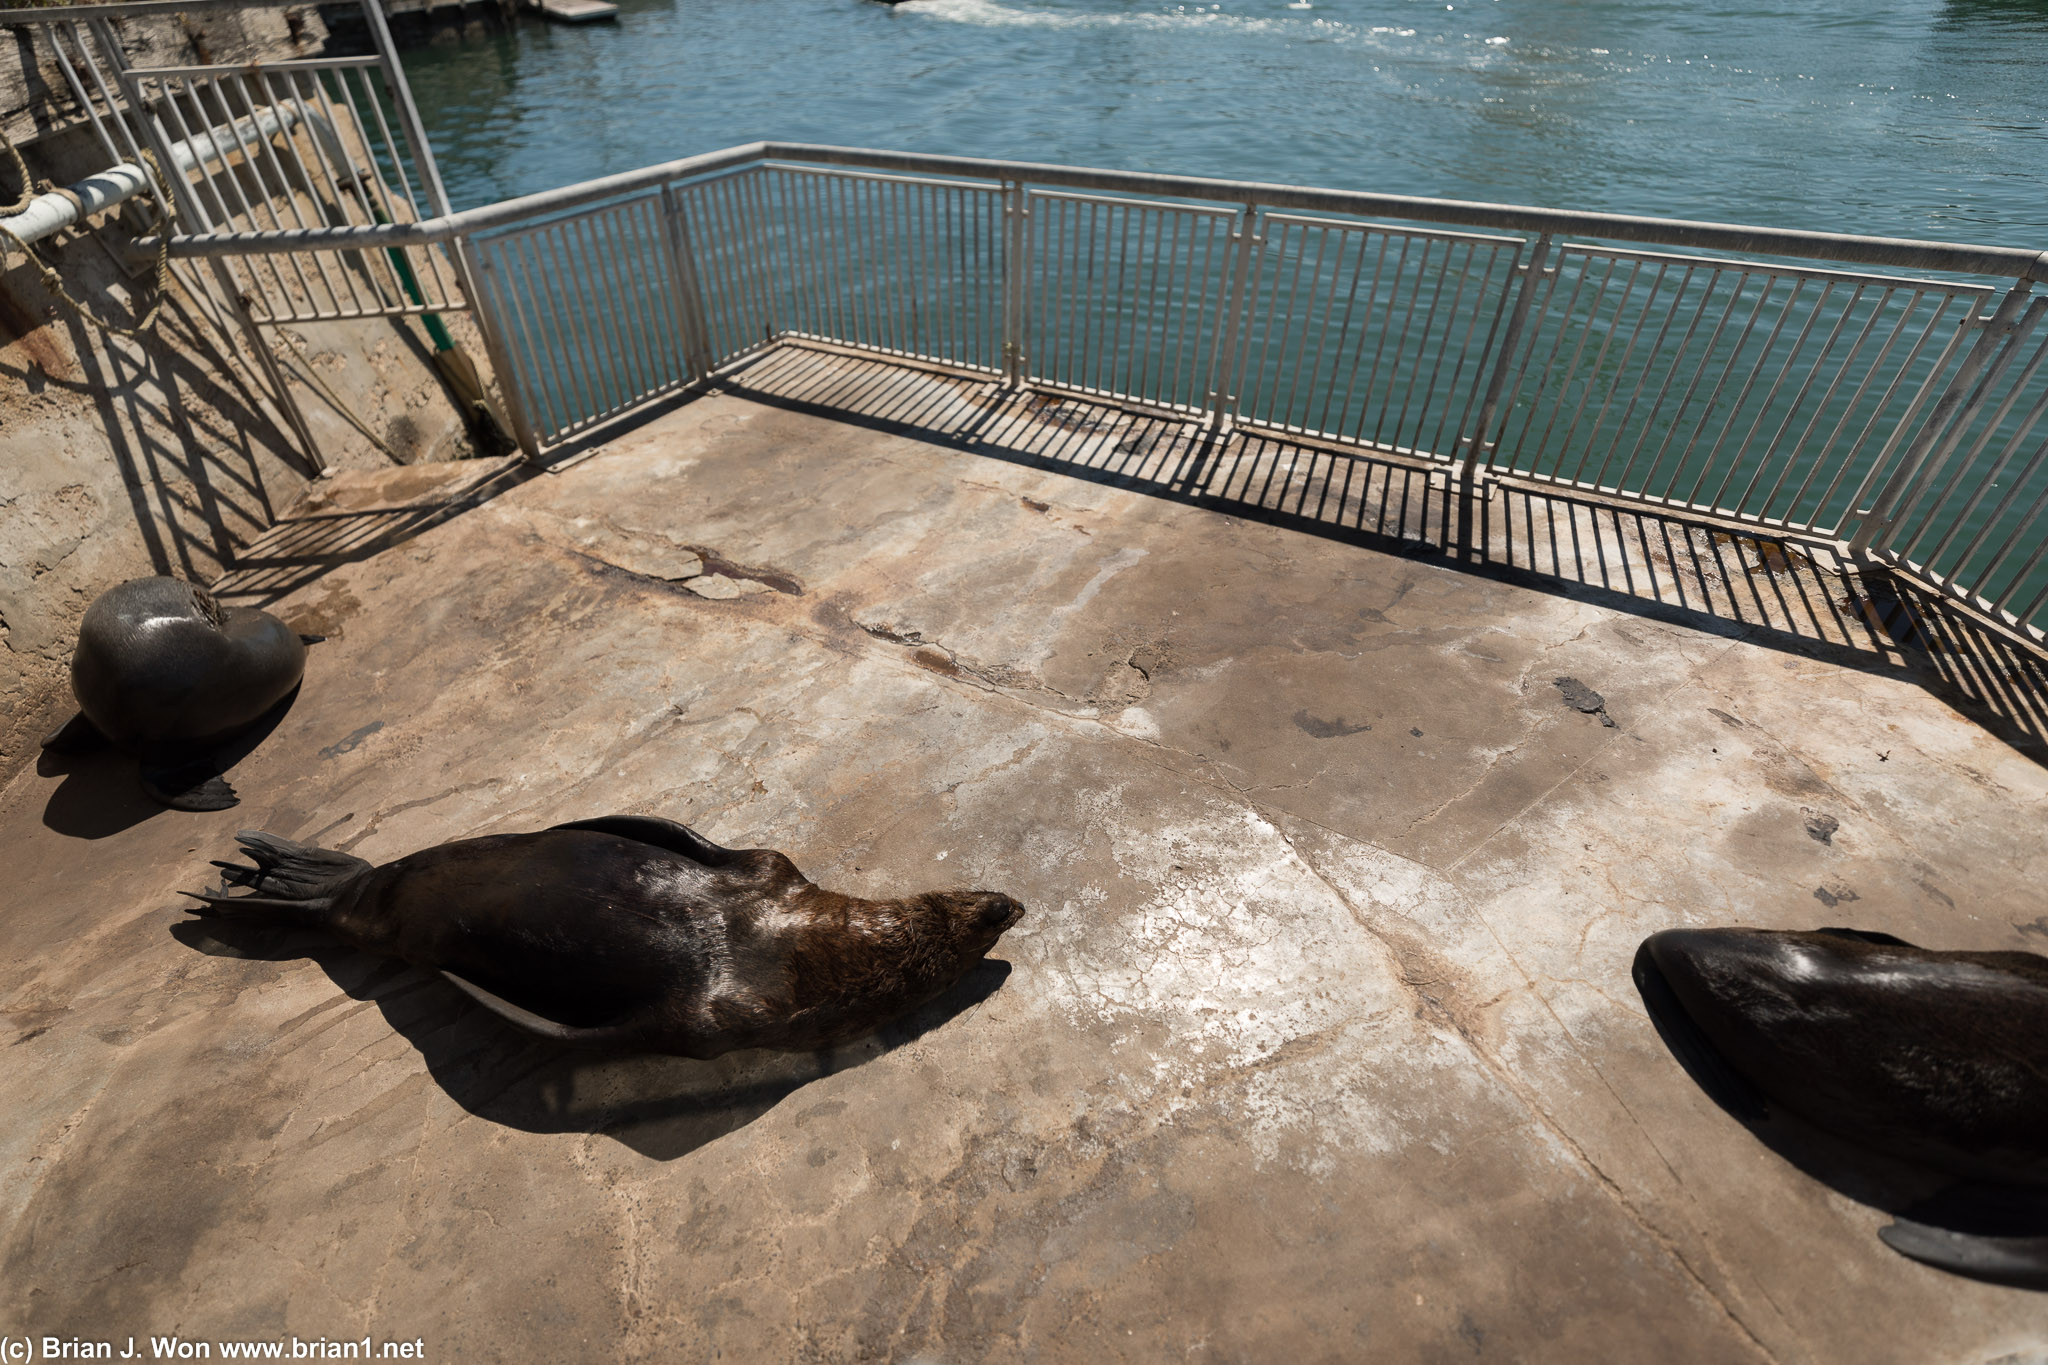 Fur seals smelling up the dock. Errr, I mean sunning themselves on the dock.